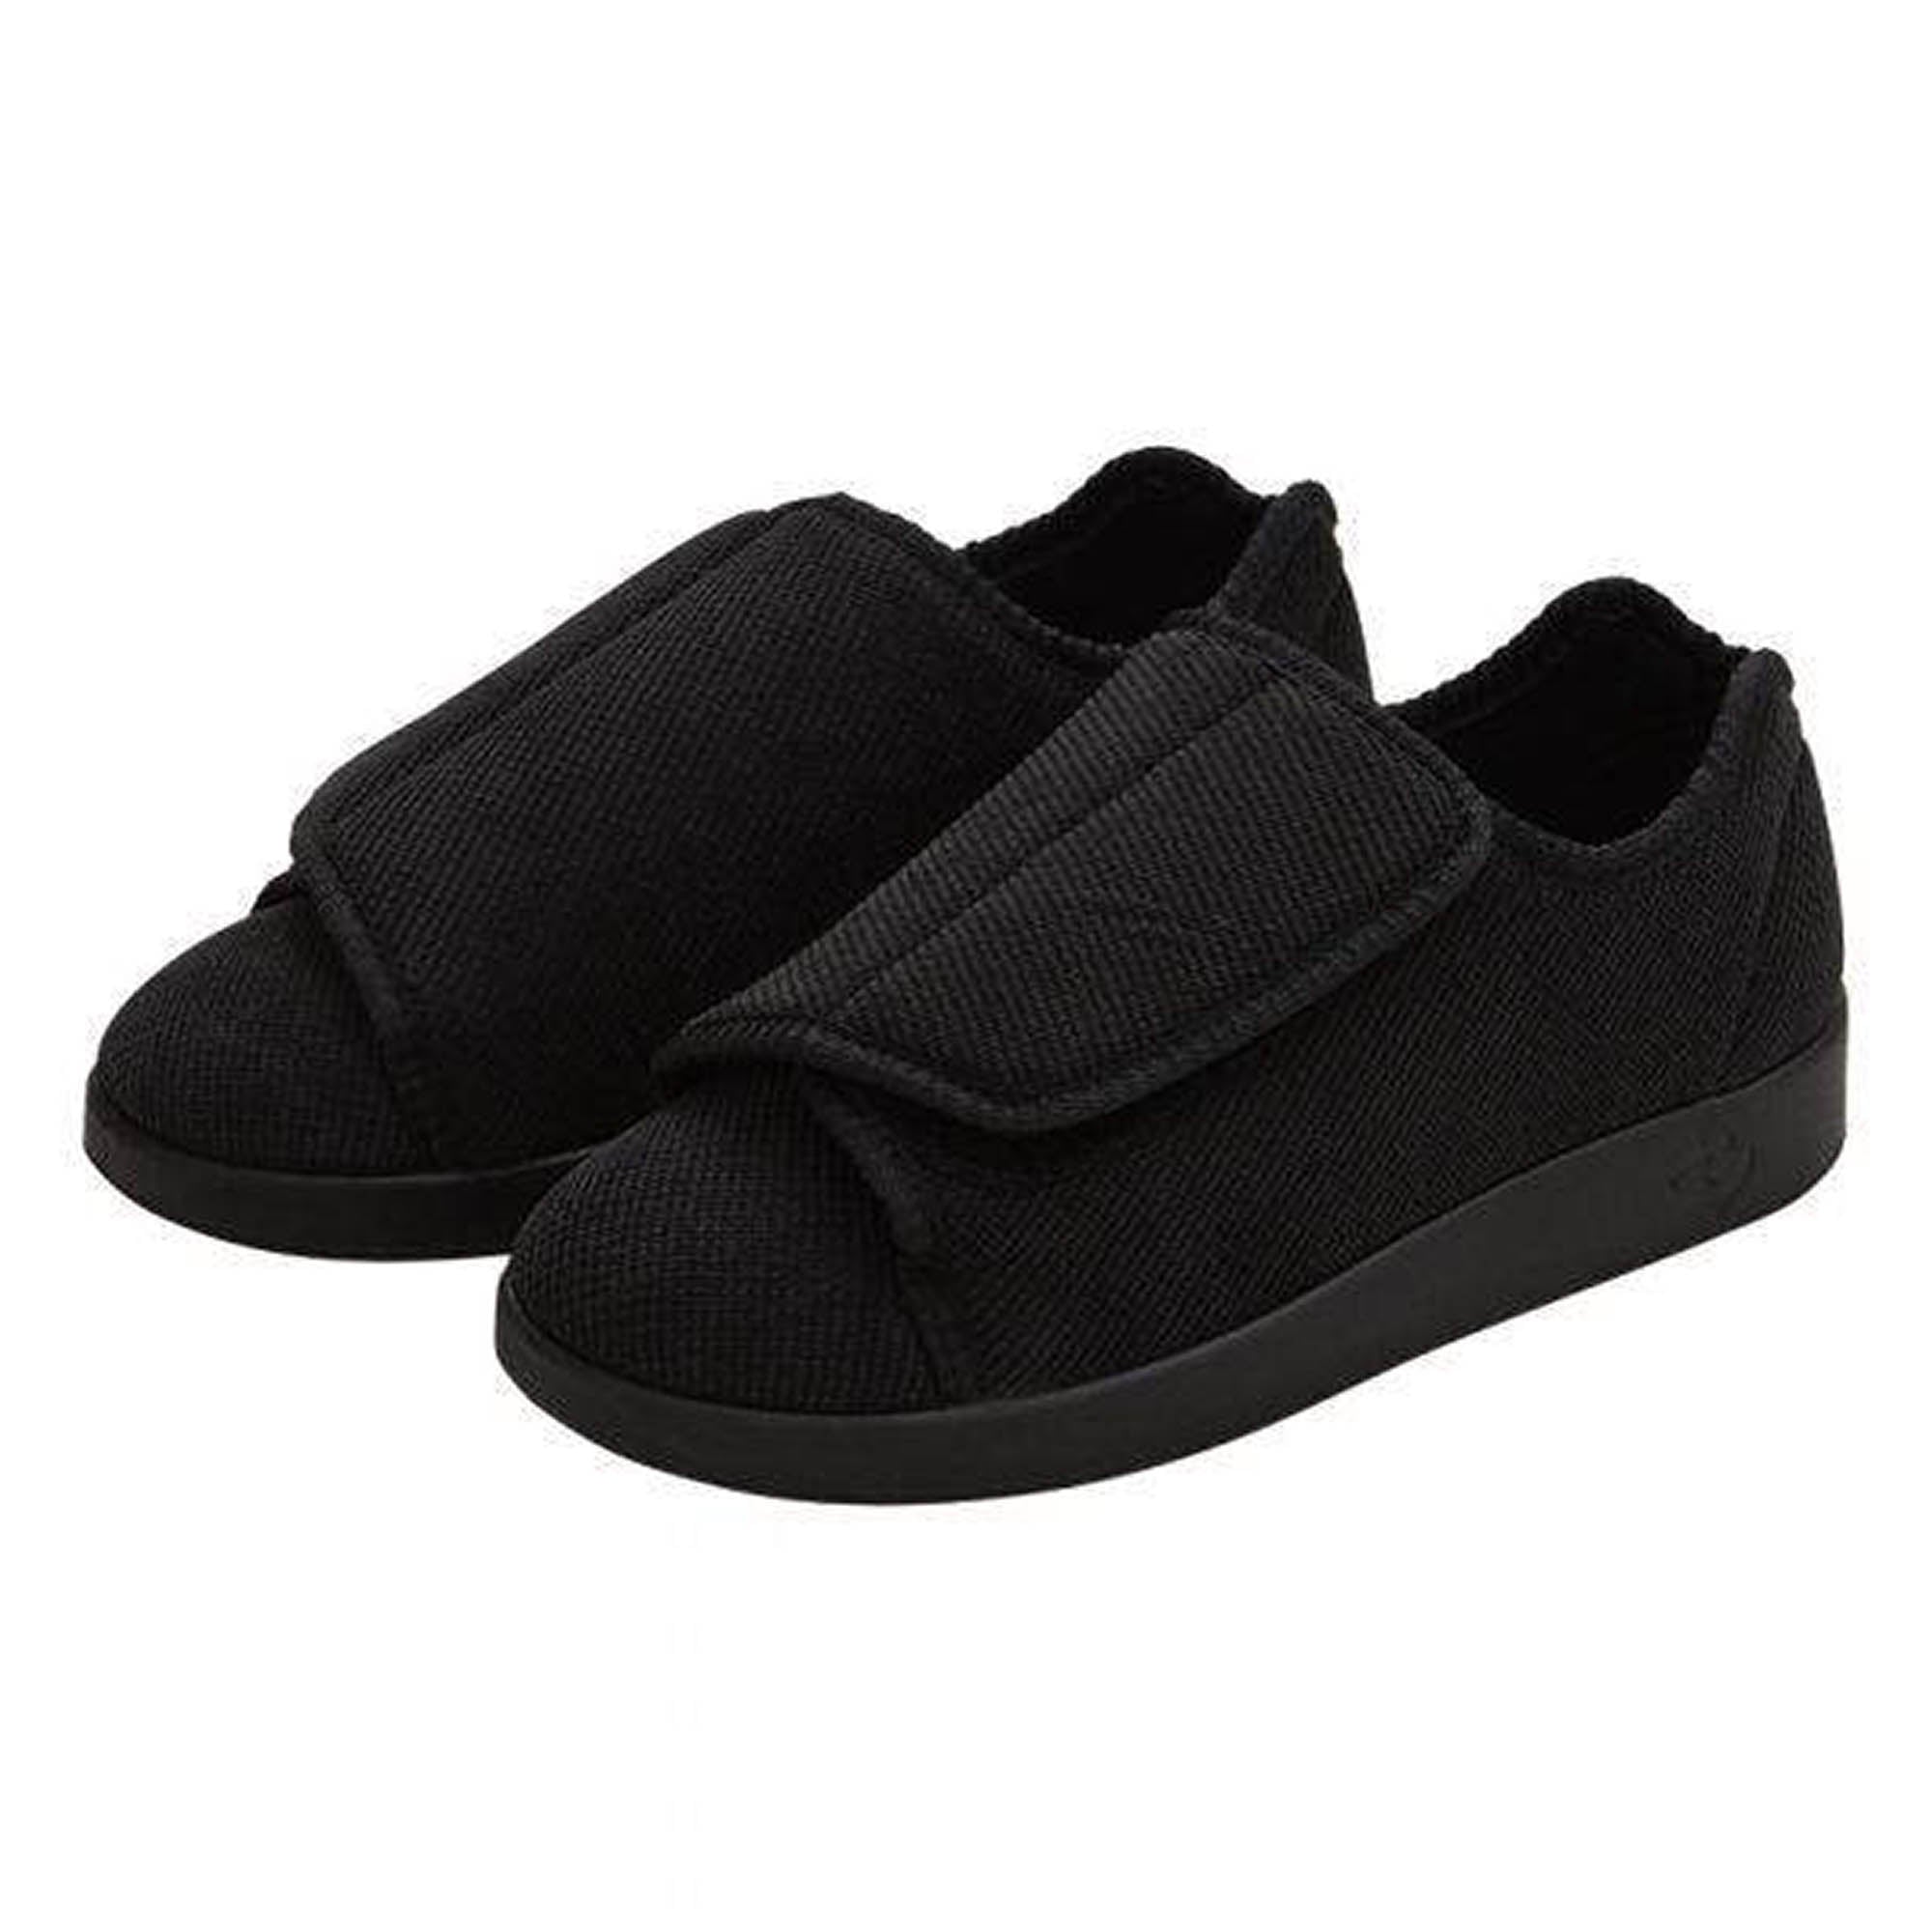 Silverts Women's Antimicrobial Extra Extra Wide Easy-Closure Slippers - Black - 11